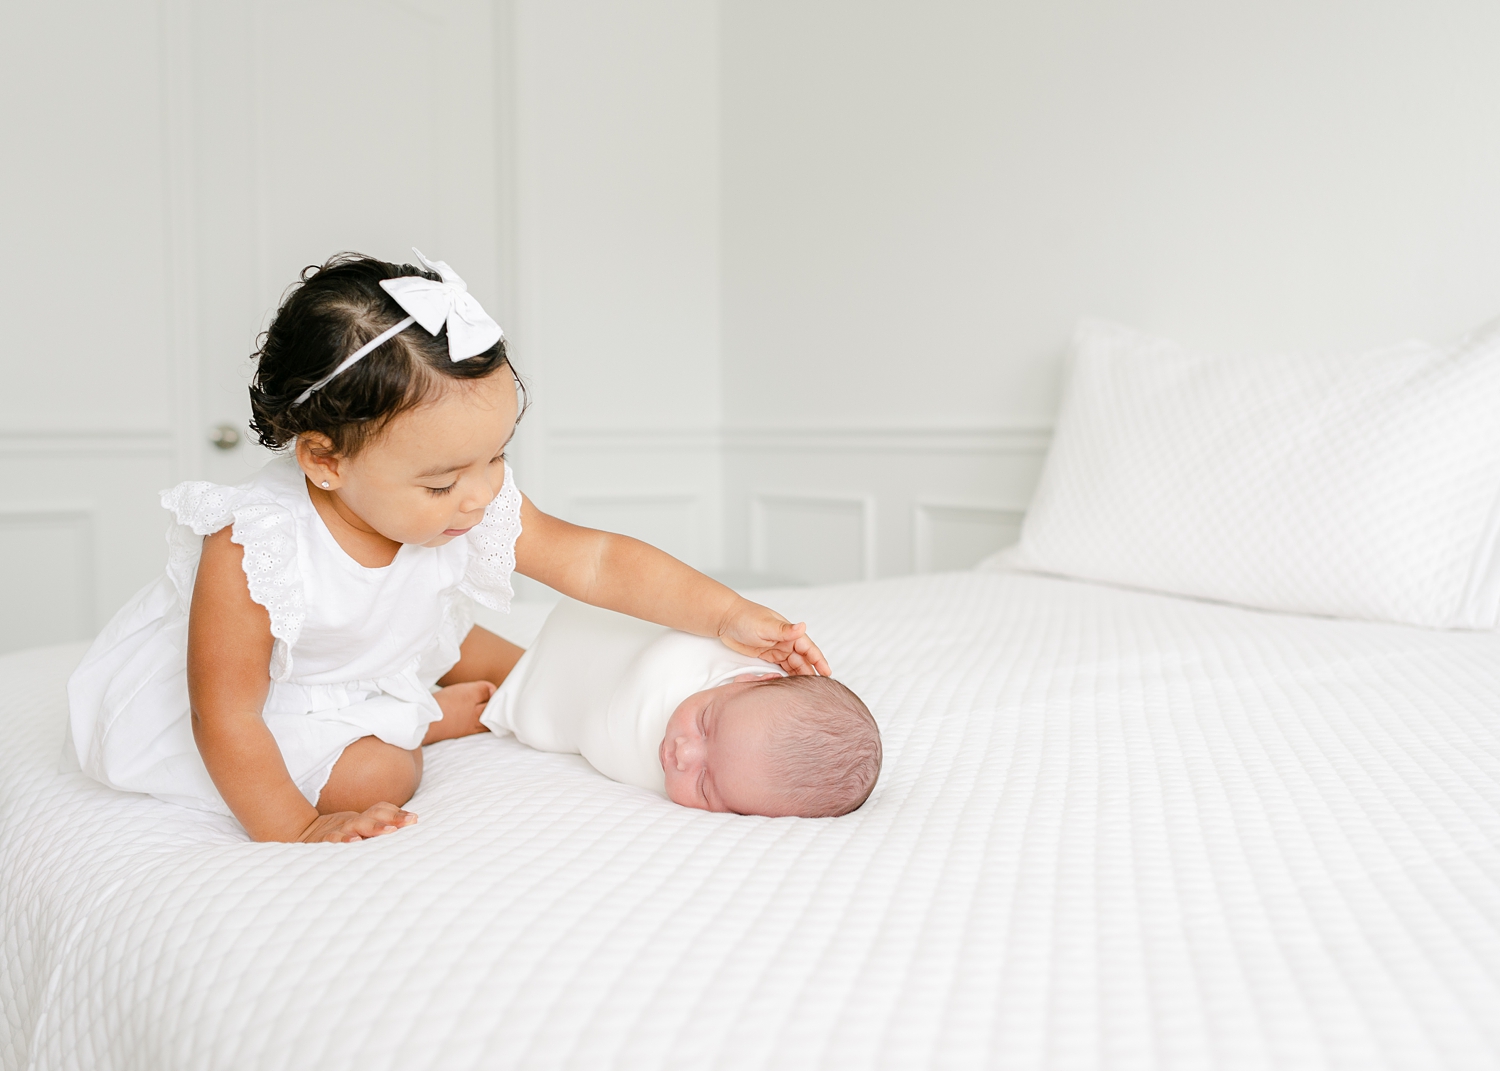 little girl dressed in white touching newborn baby boy on bed in white covers